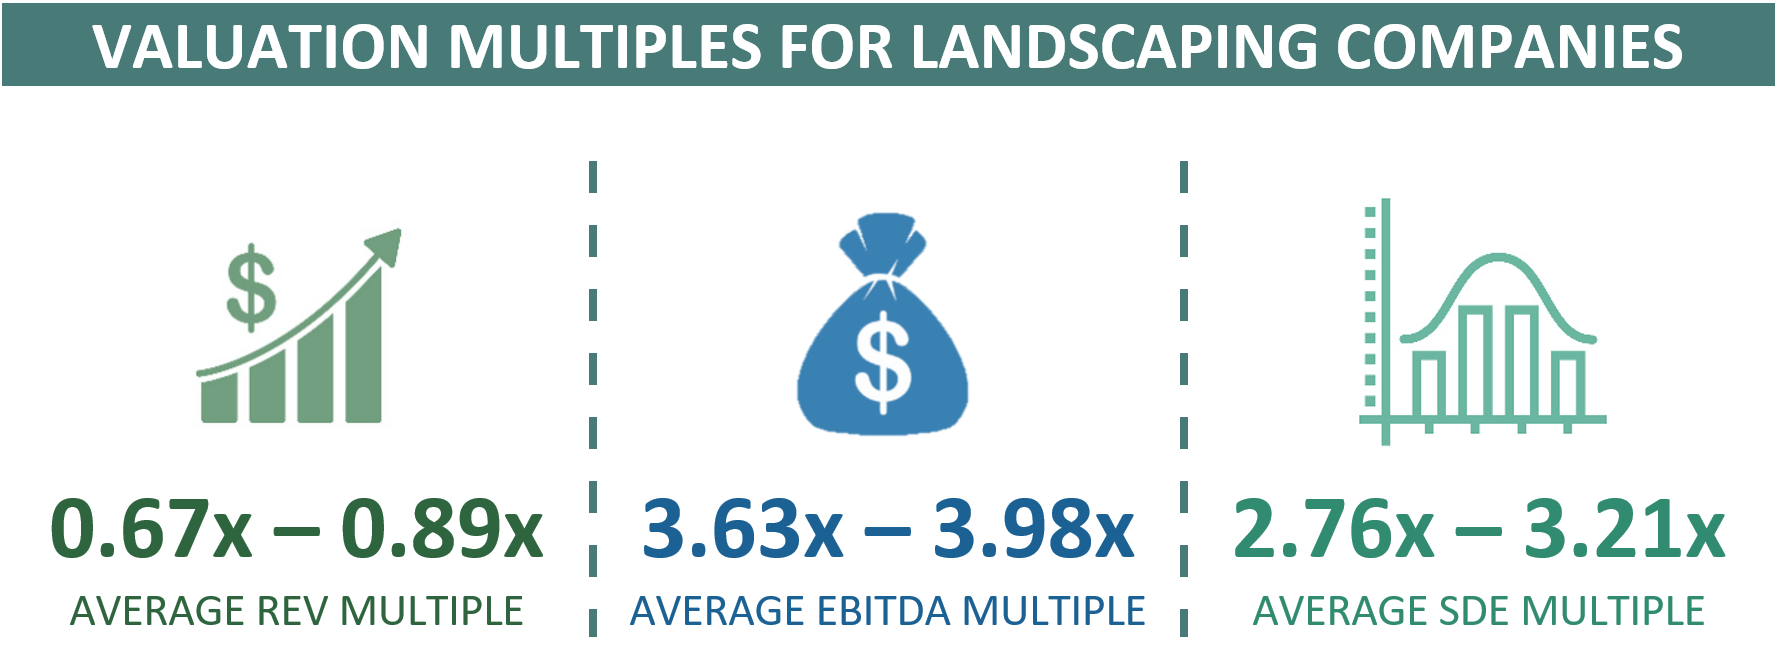 Valuation Multiples For A Landscaping Company